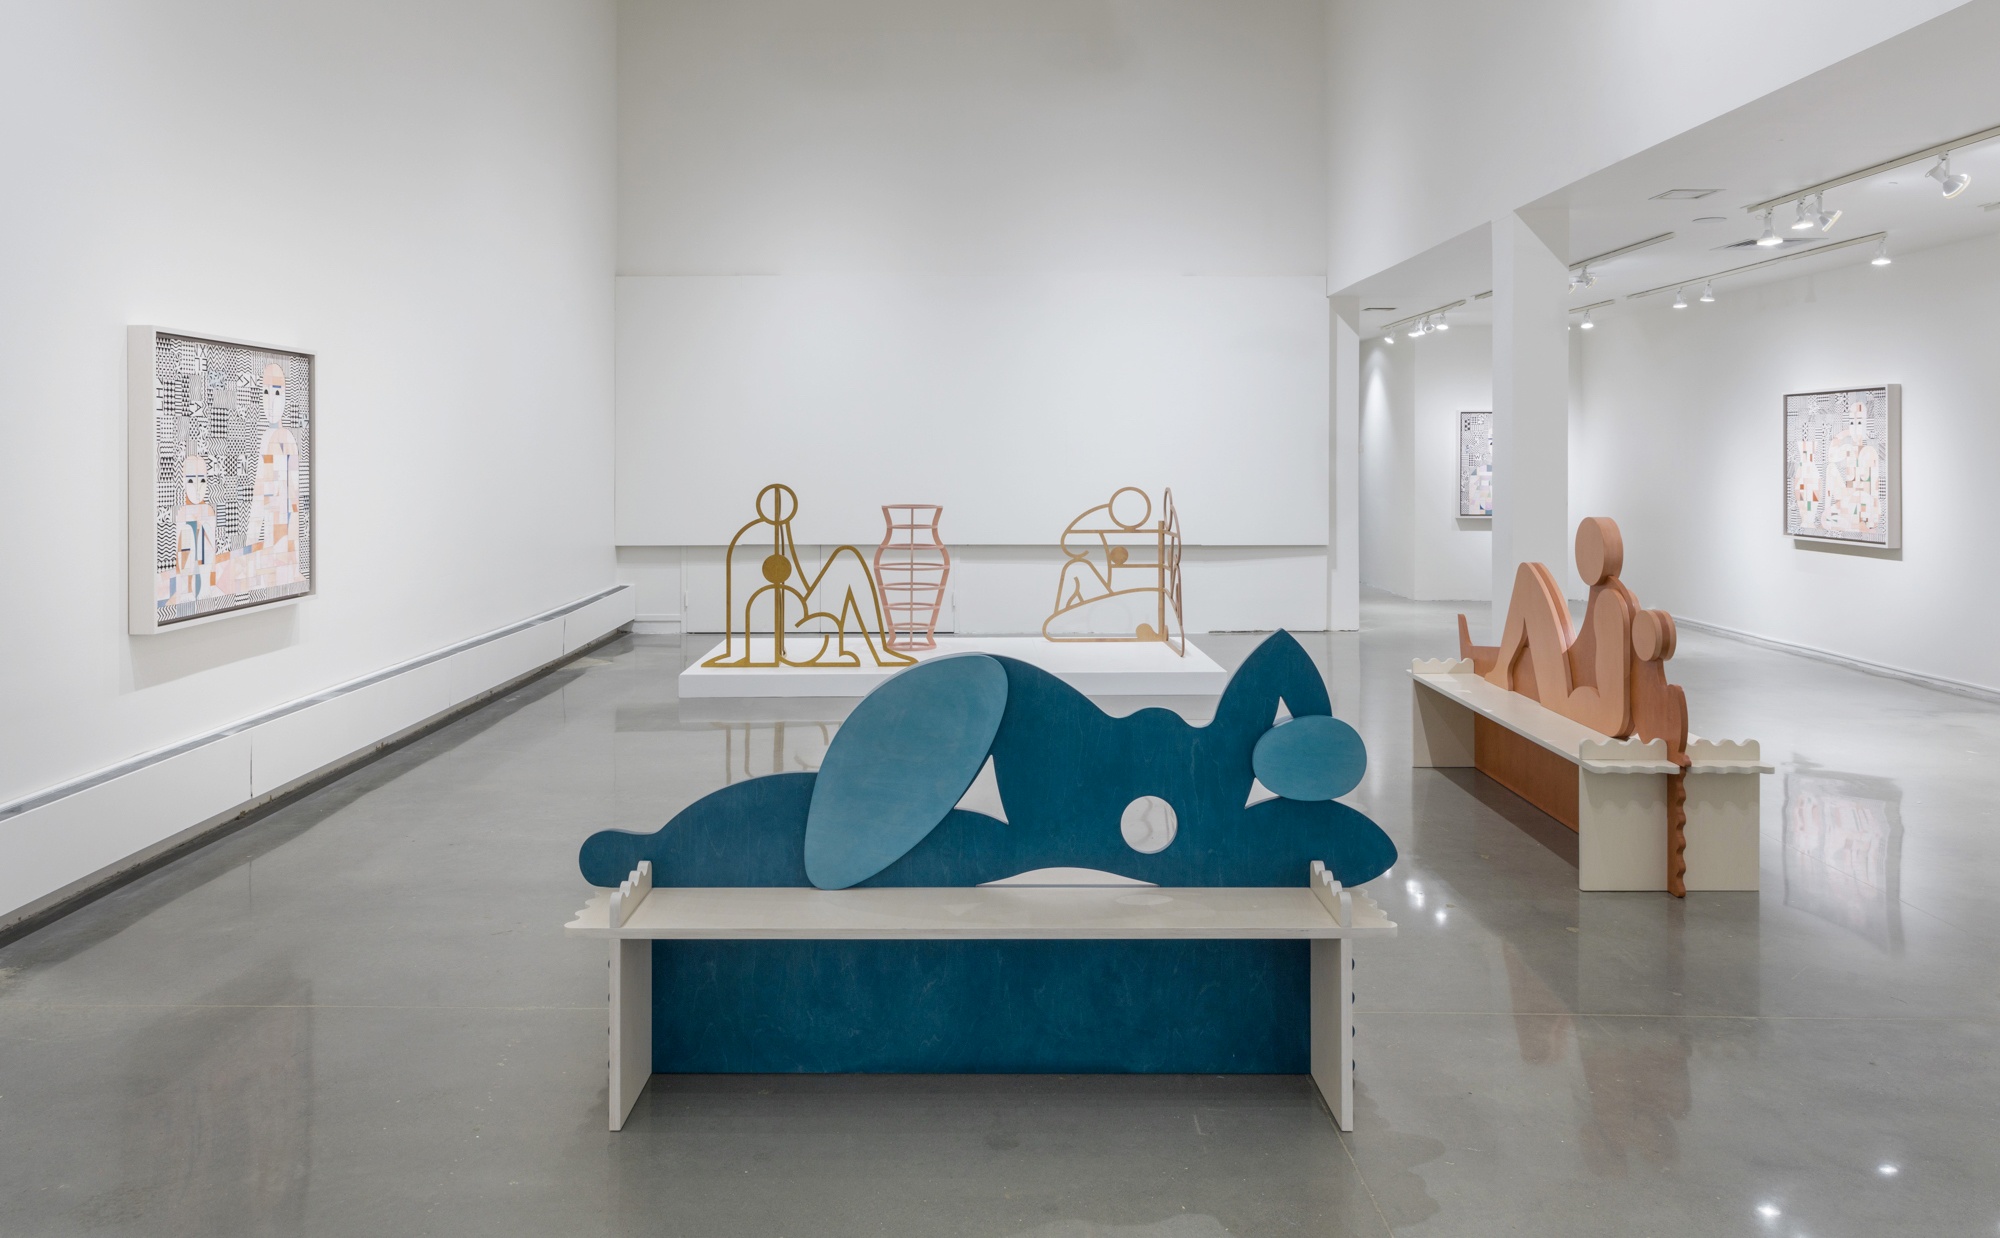 A sculpture of a large, simplistic, blue female figure reclines on a bench in front of another sculpture with multiple abstract figures sitting around a vase.